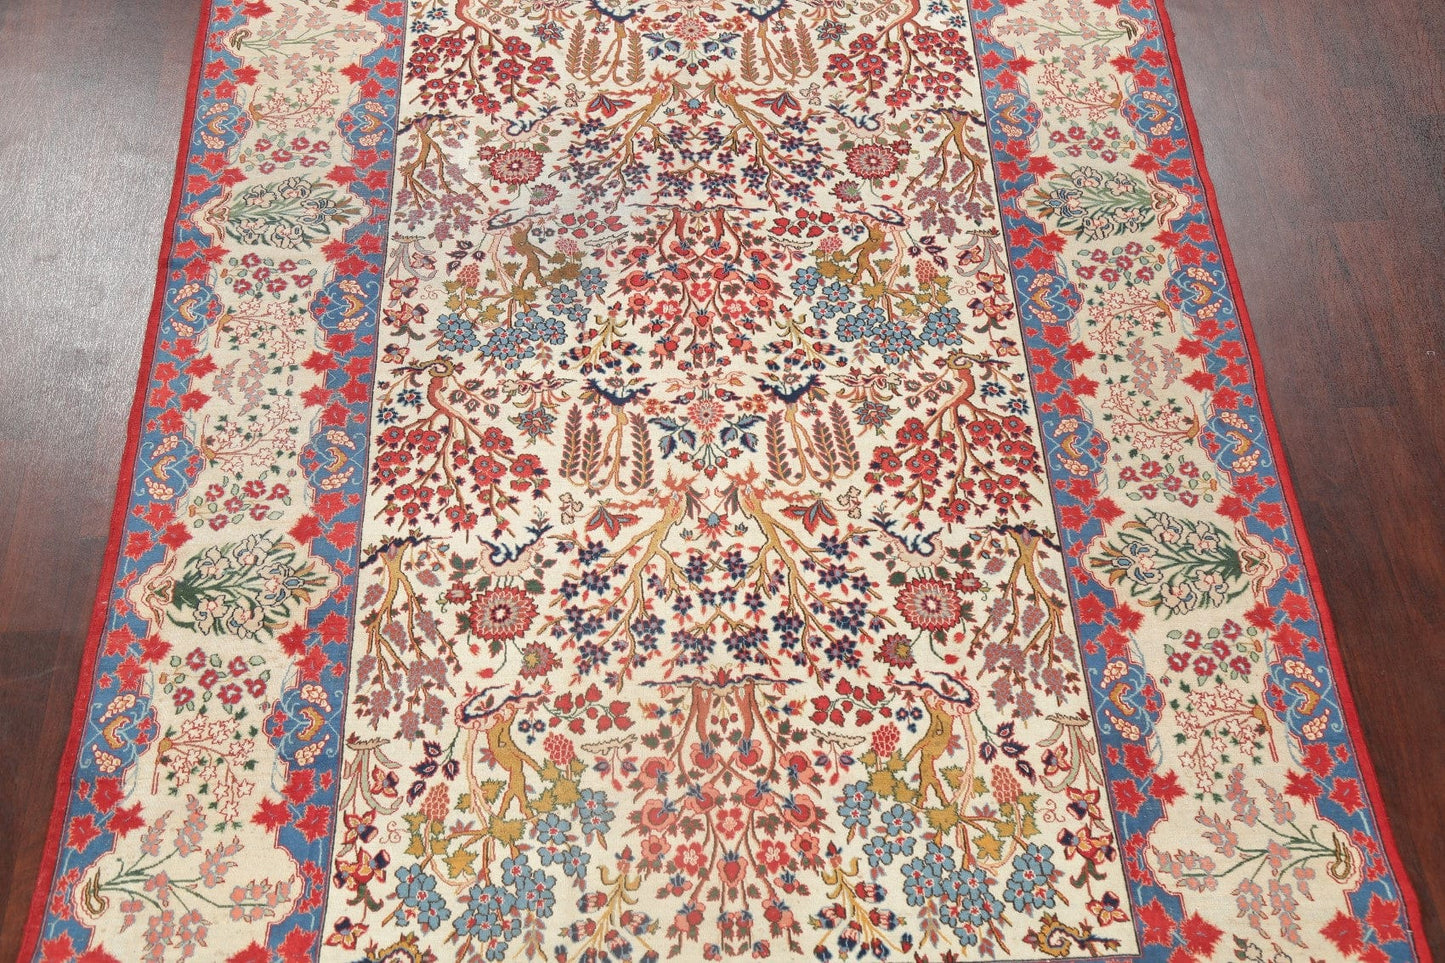 All-Over Floral Kashan Persian Area Rug 8x11